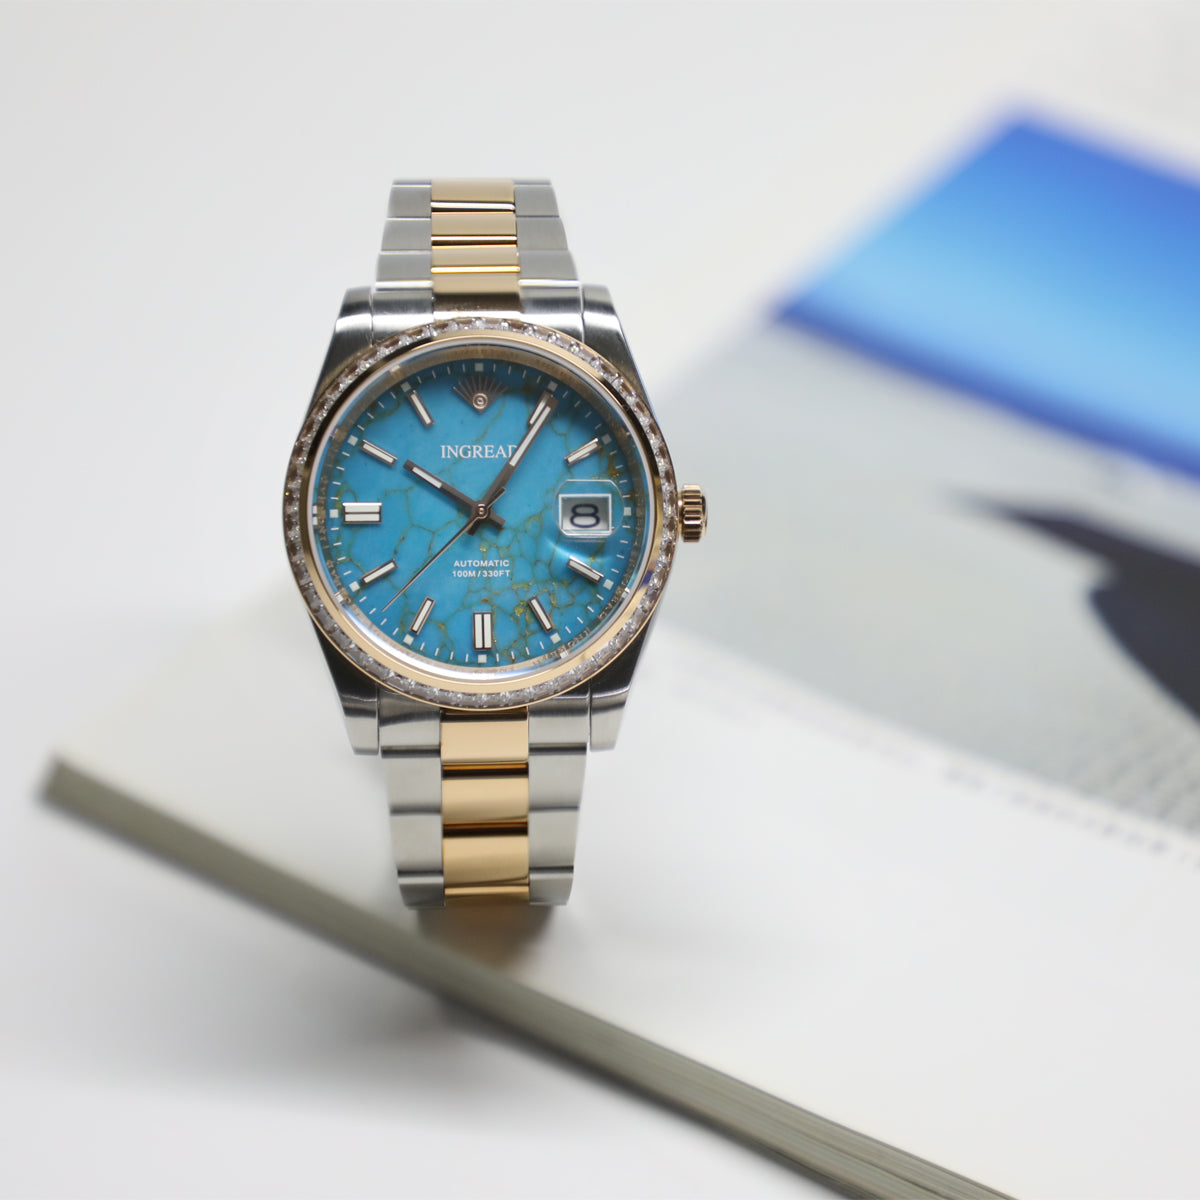 Blue Turquoise Dial with Zircon Gems, Sapphire Crystal 40mm, Stainless Steel Watch